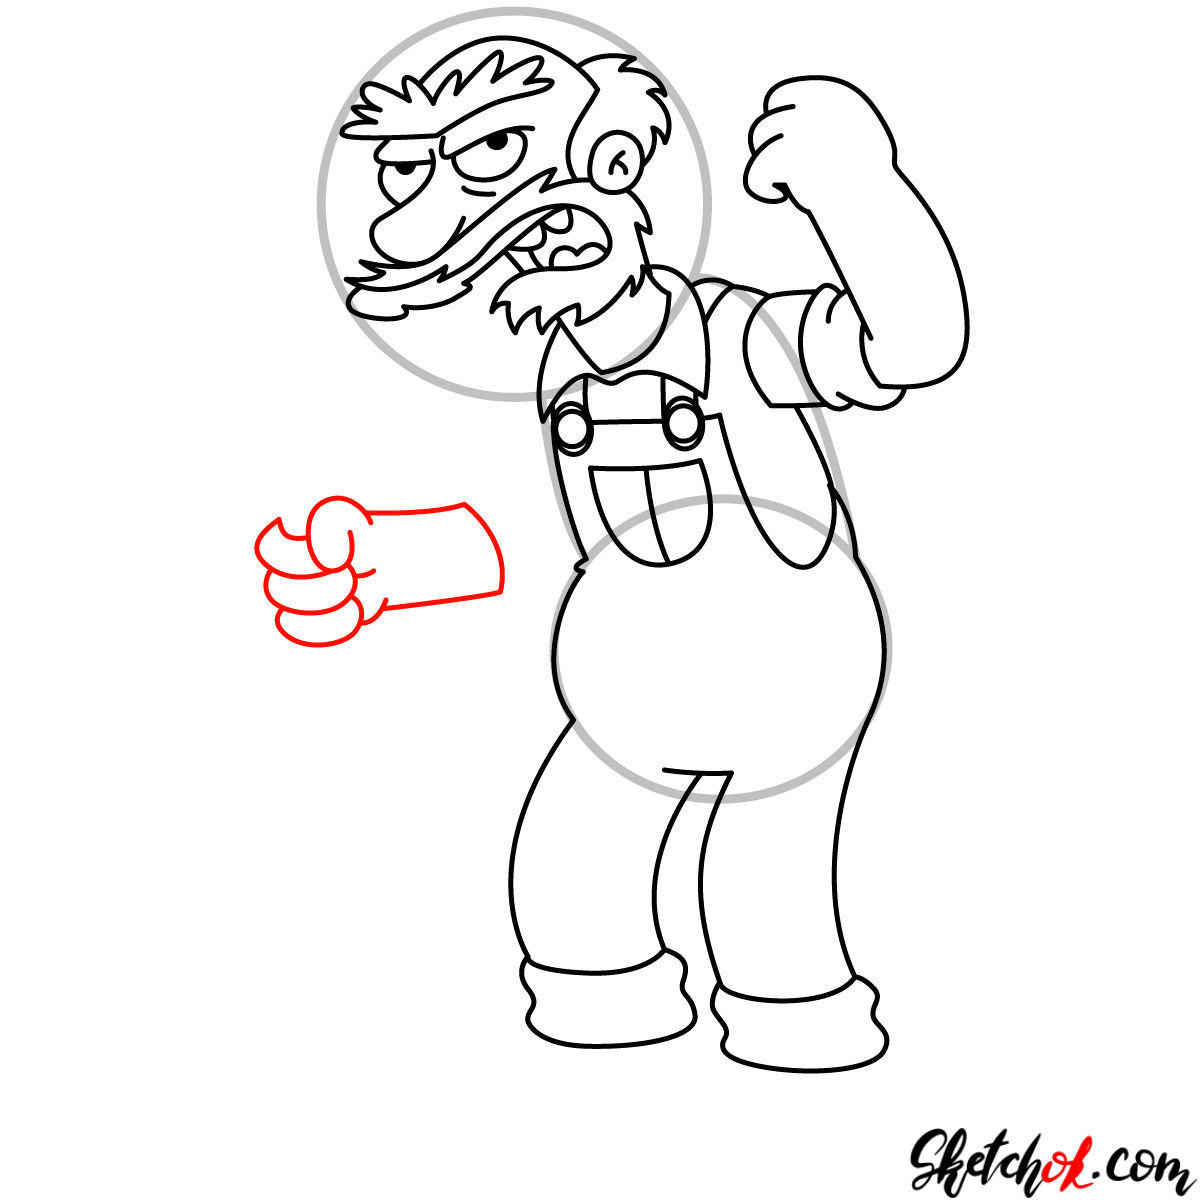 How to draw Groundskeeper Willie with a shovel - step 11